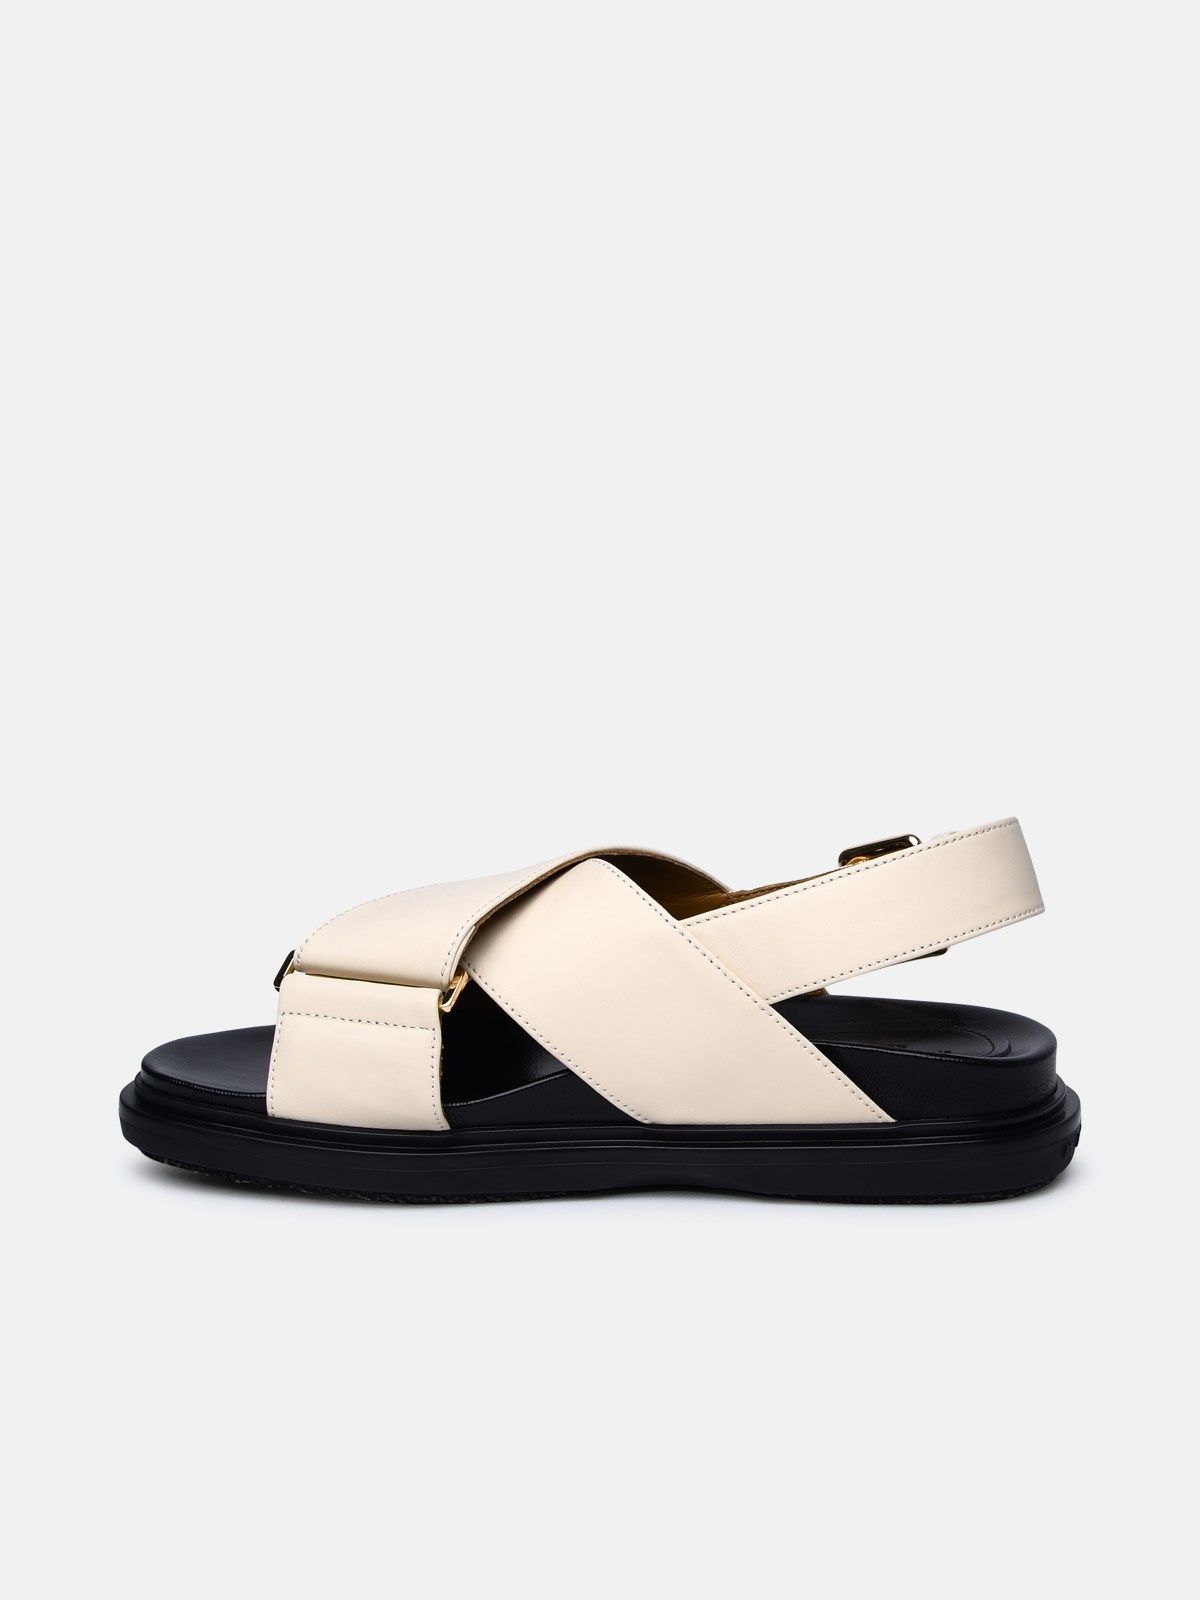 IVORY LEATHER SANDALS - 3